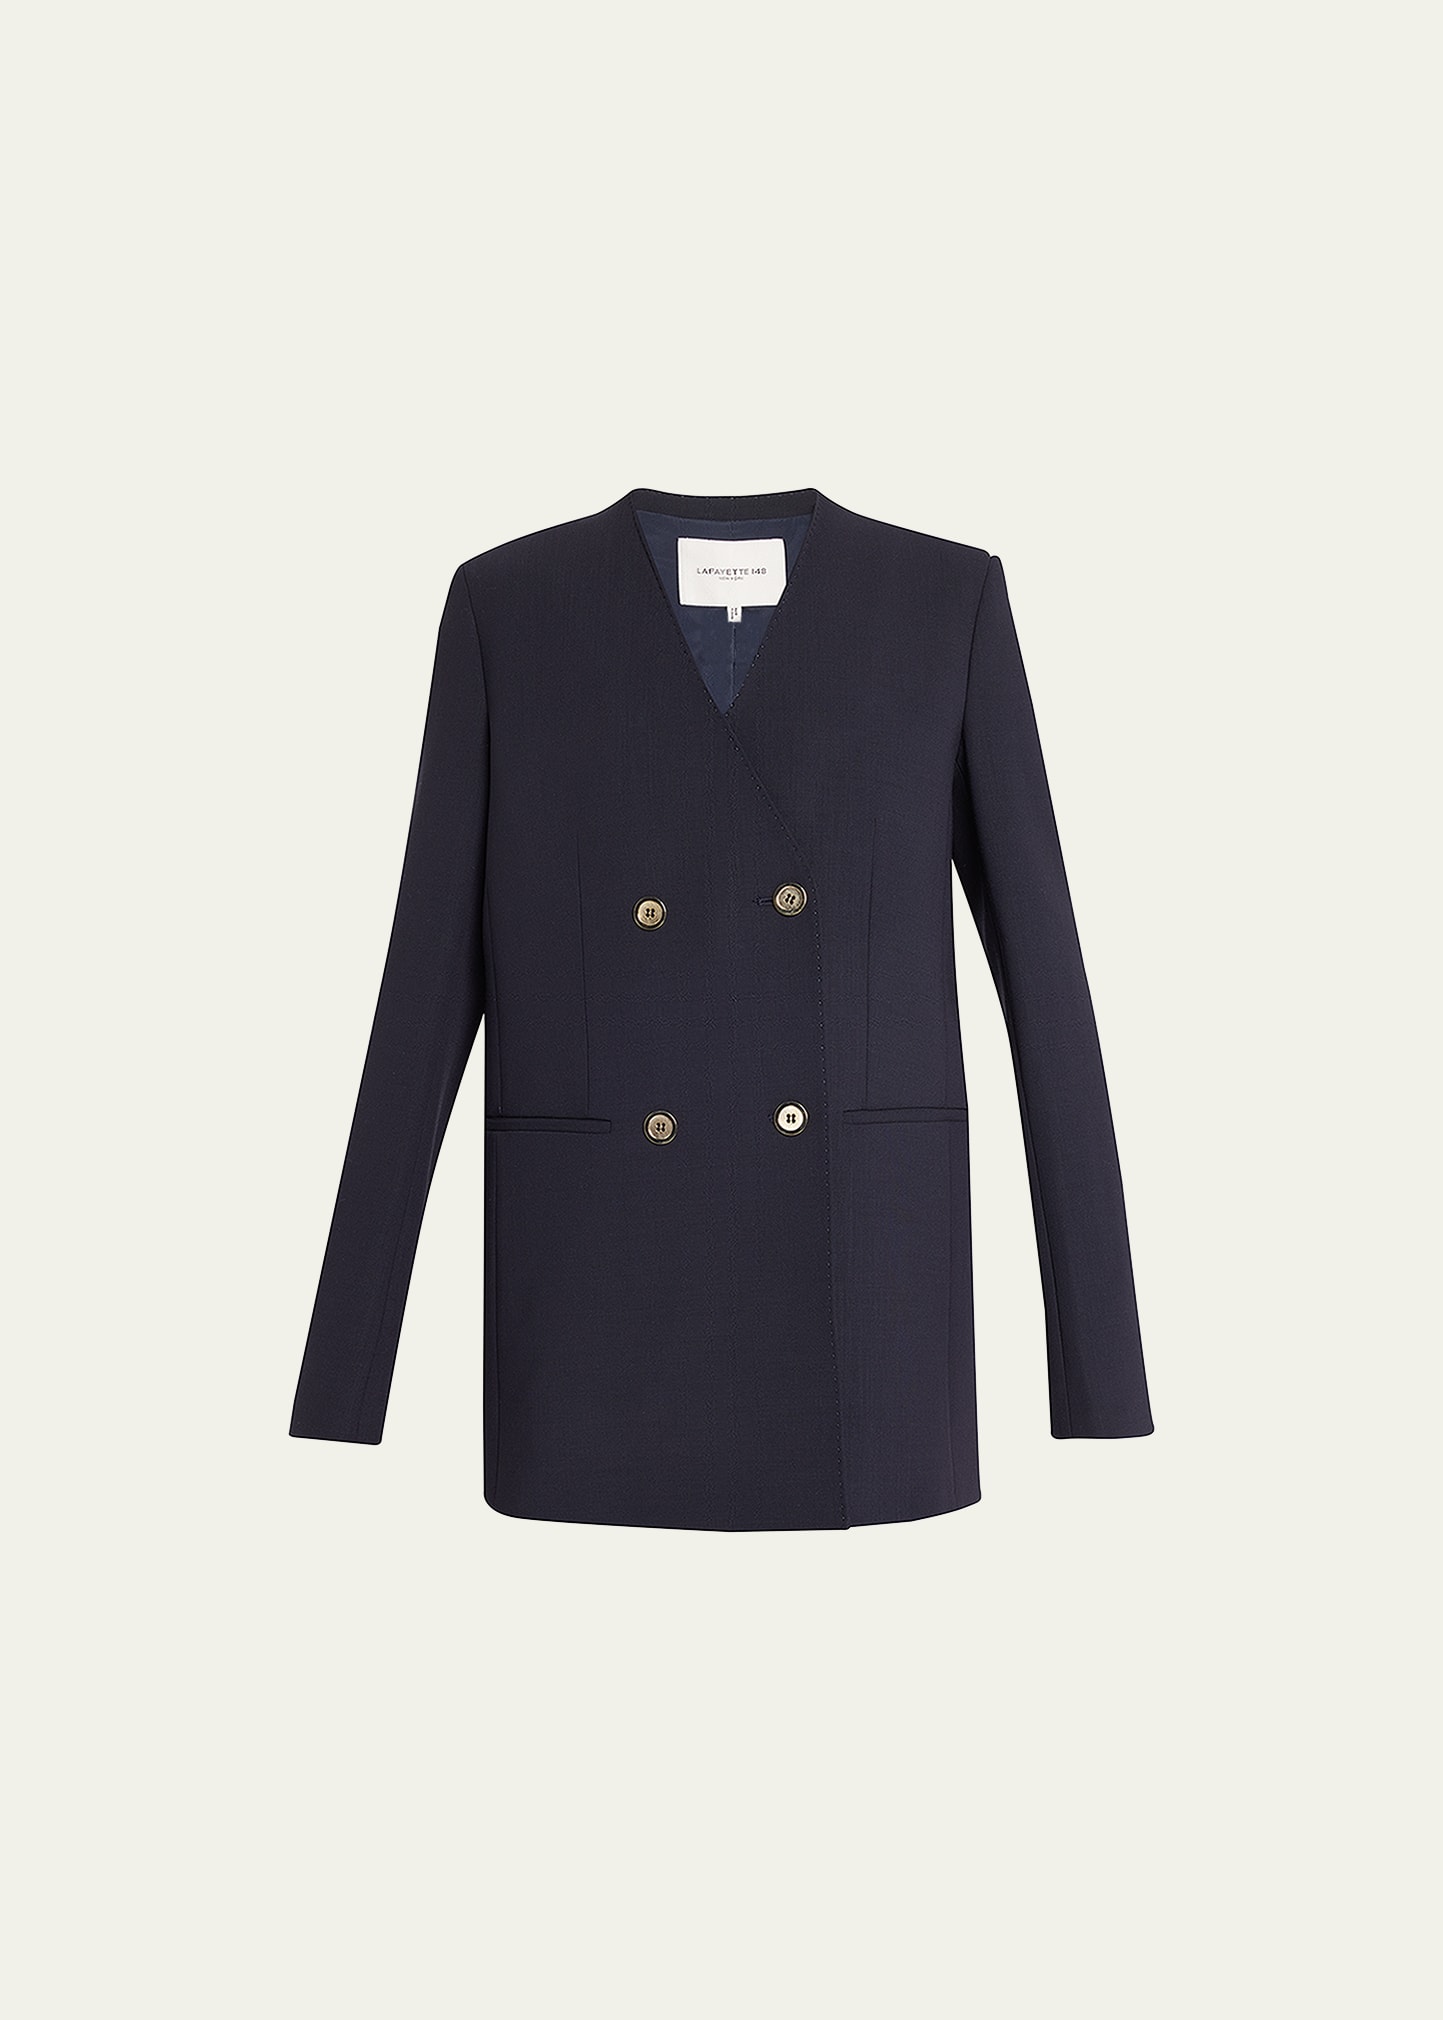 LAFAYETTE 148 COLLARLESS DOUBLE-BREASTED BLAZER